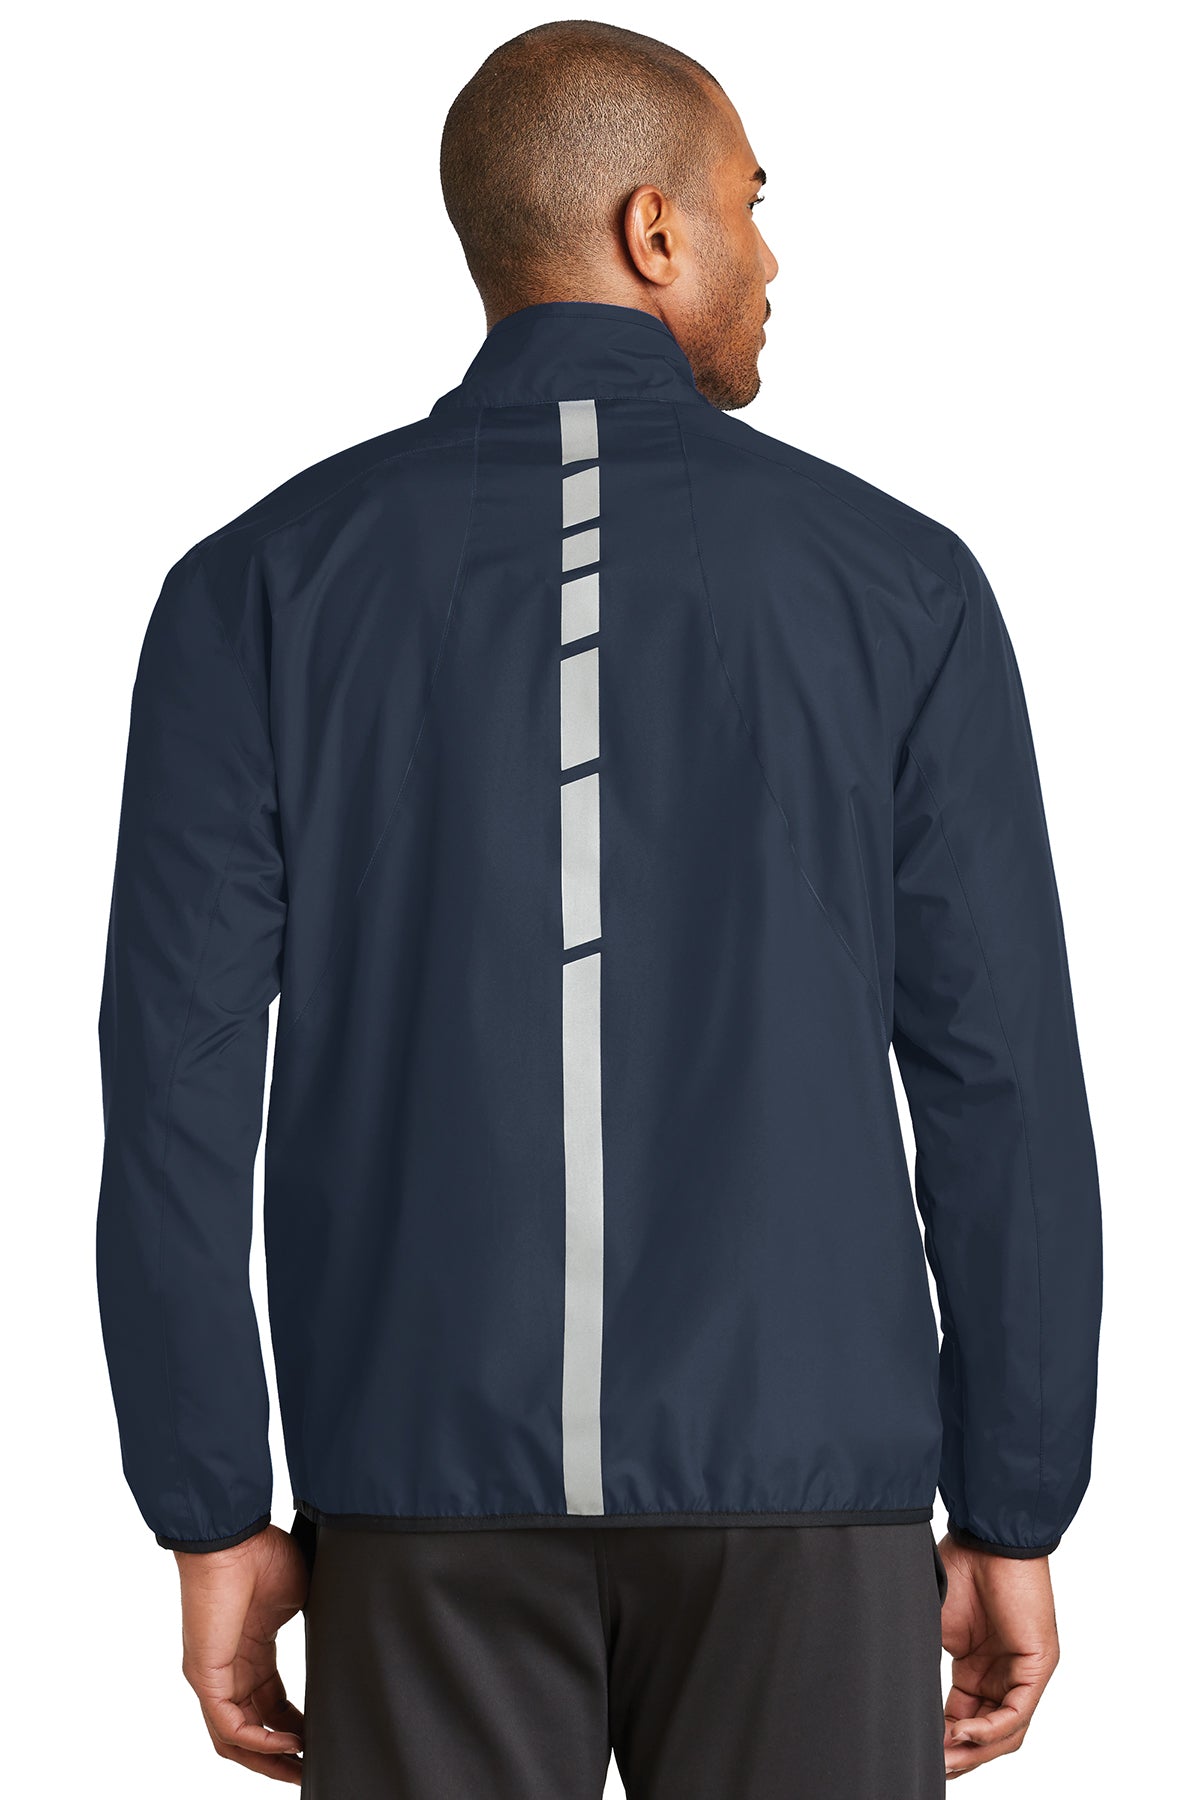 F3 Port Authority Zephyr Reflective Hit Full-Zip Jacket - Made To Order